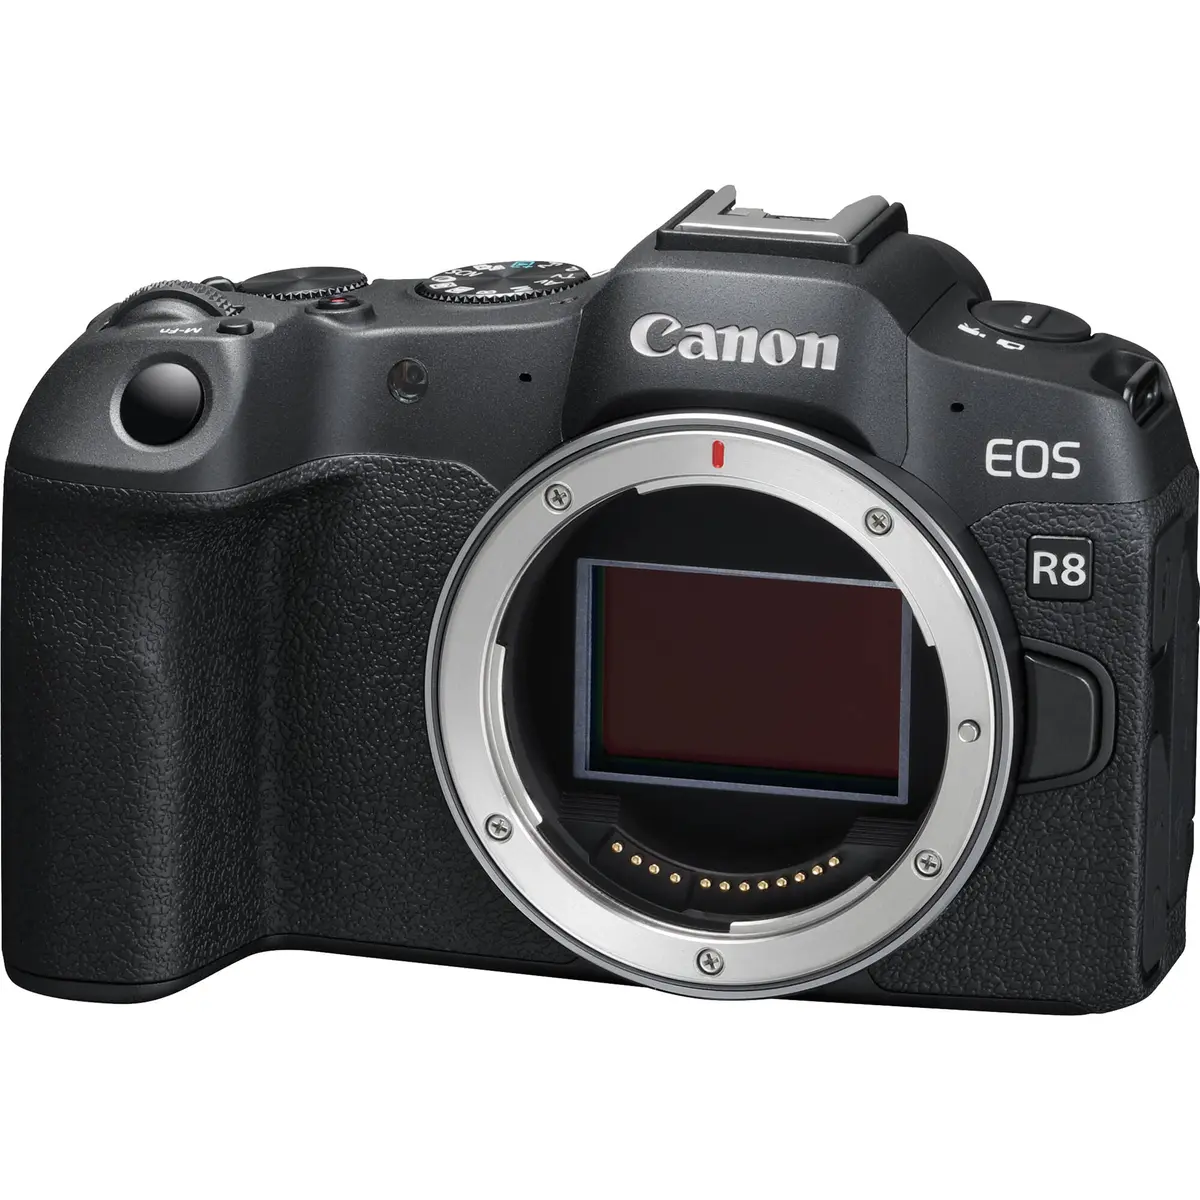 1. Canon EOS R8 Body (with adapter)